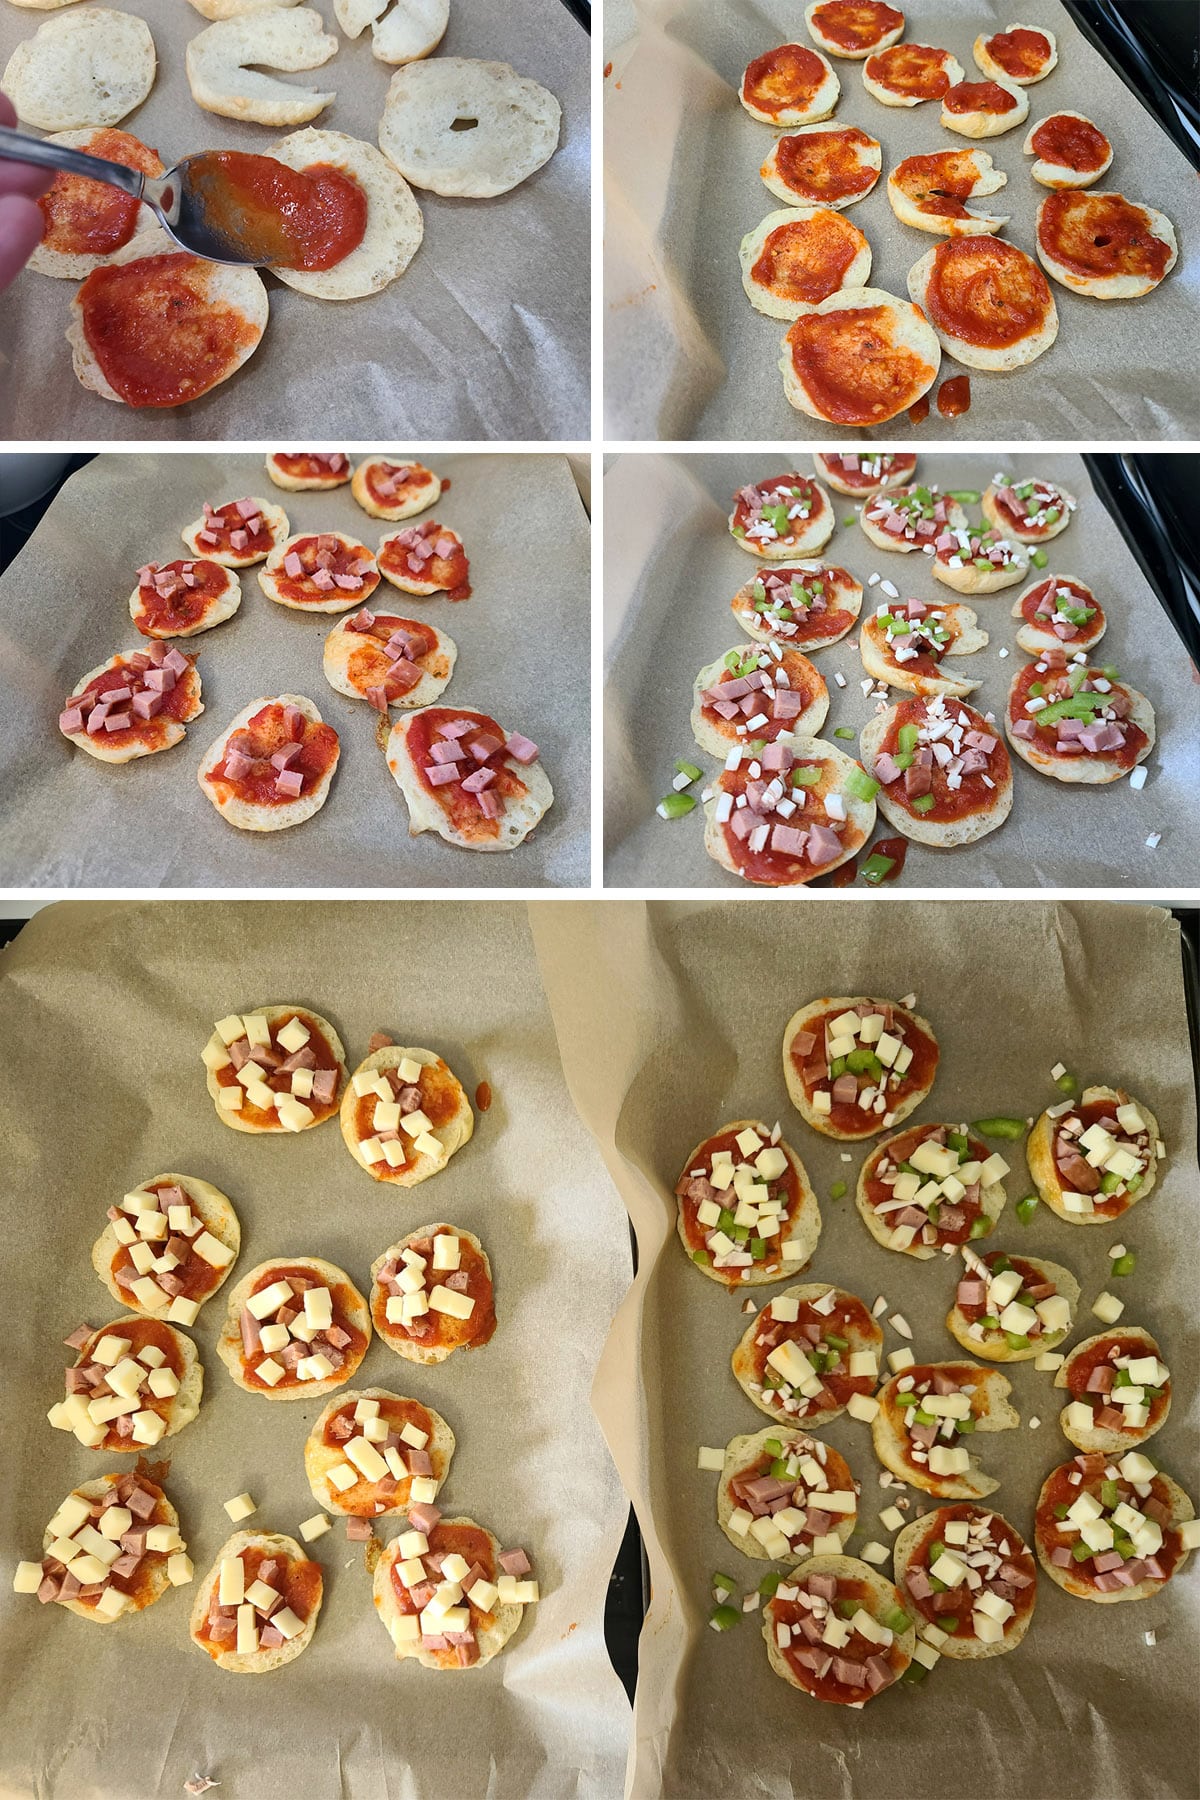 A 5 part image showing the homemade bagel bites being assembled on parchment lined baking sheets.